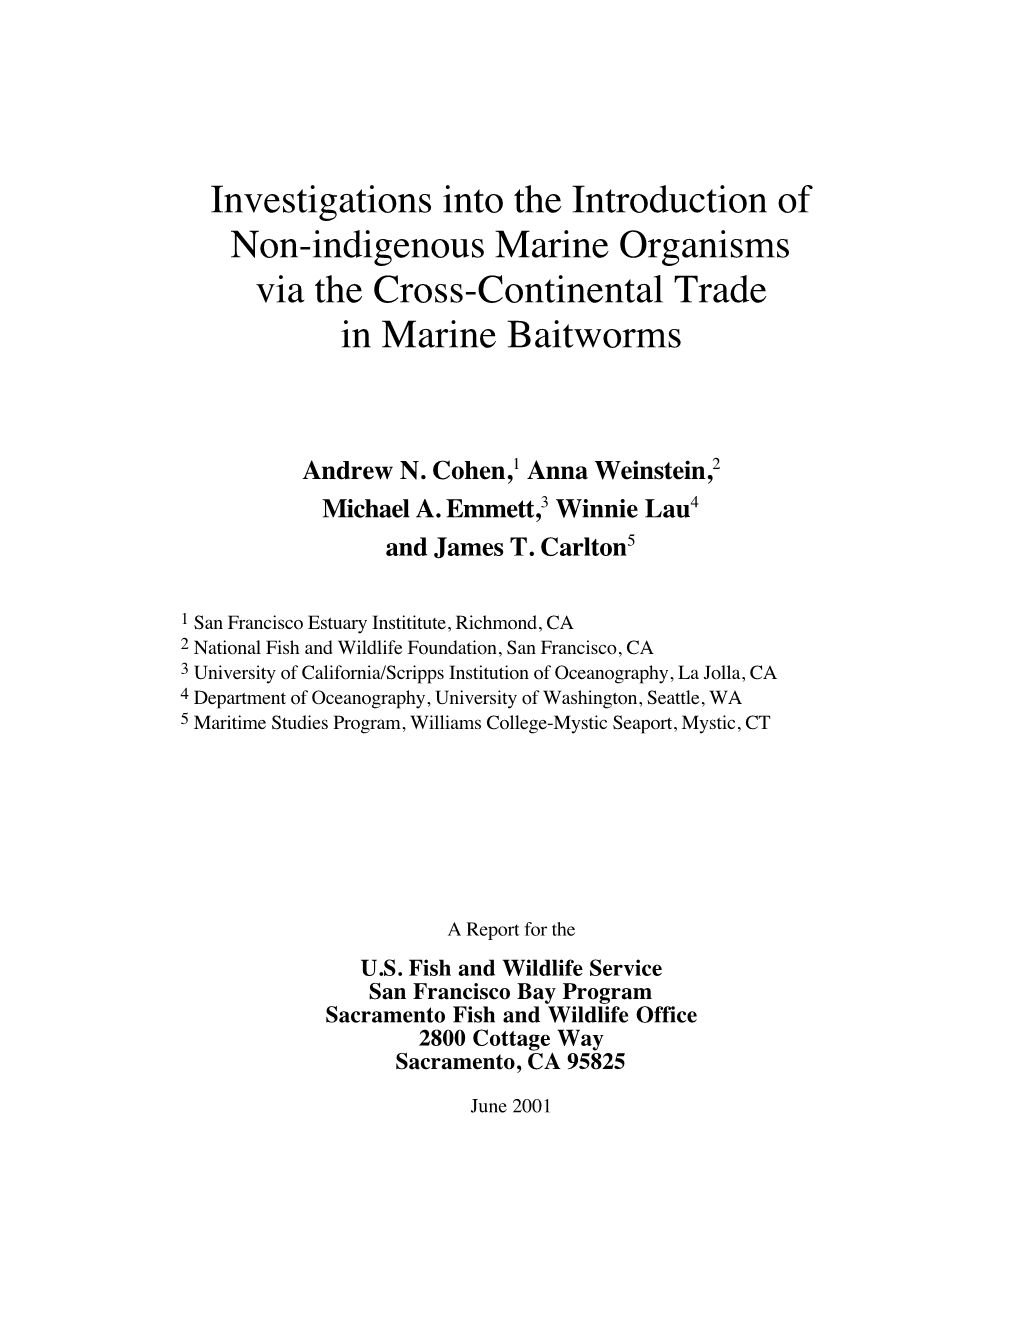 Investigations Into the Introduction of Non-Indigenous Marine Organisms Via the Cross-Continental Trade in Marine Baitworms